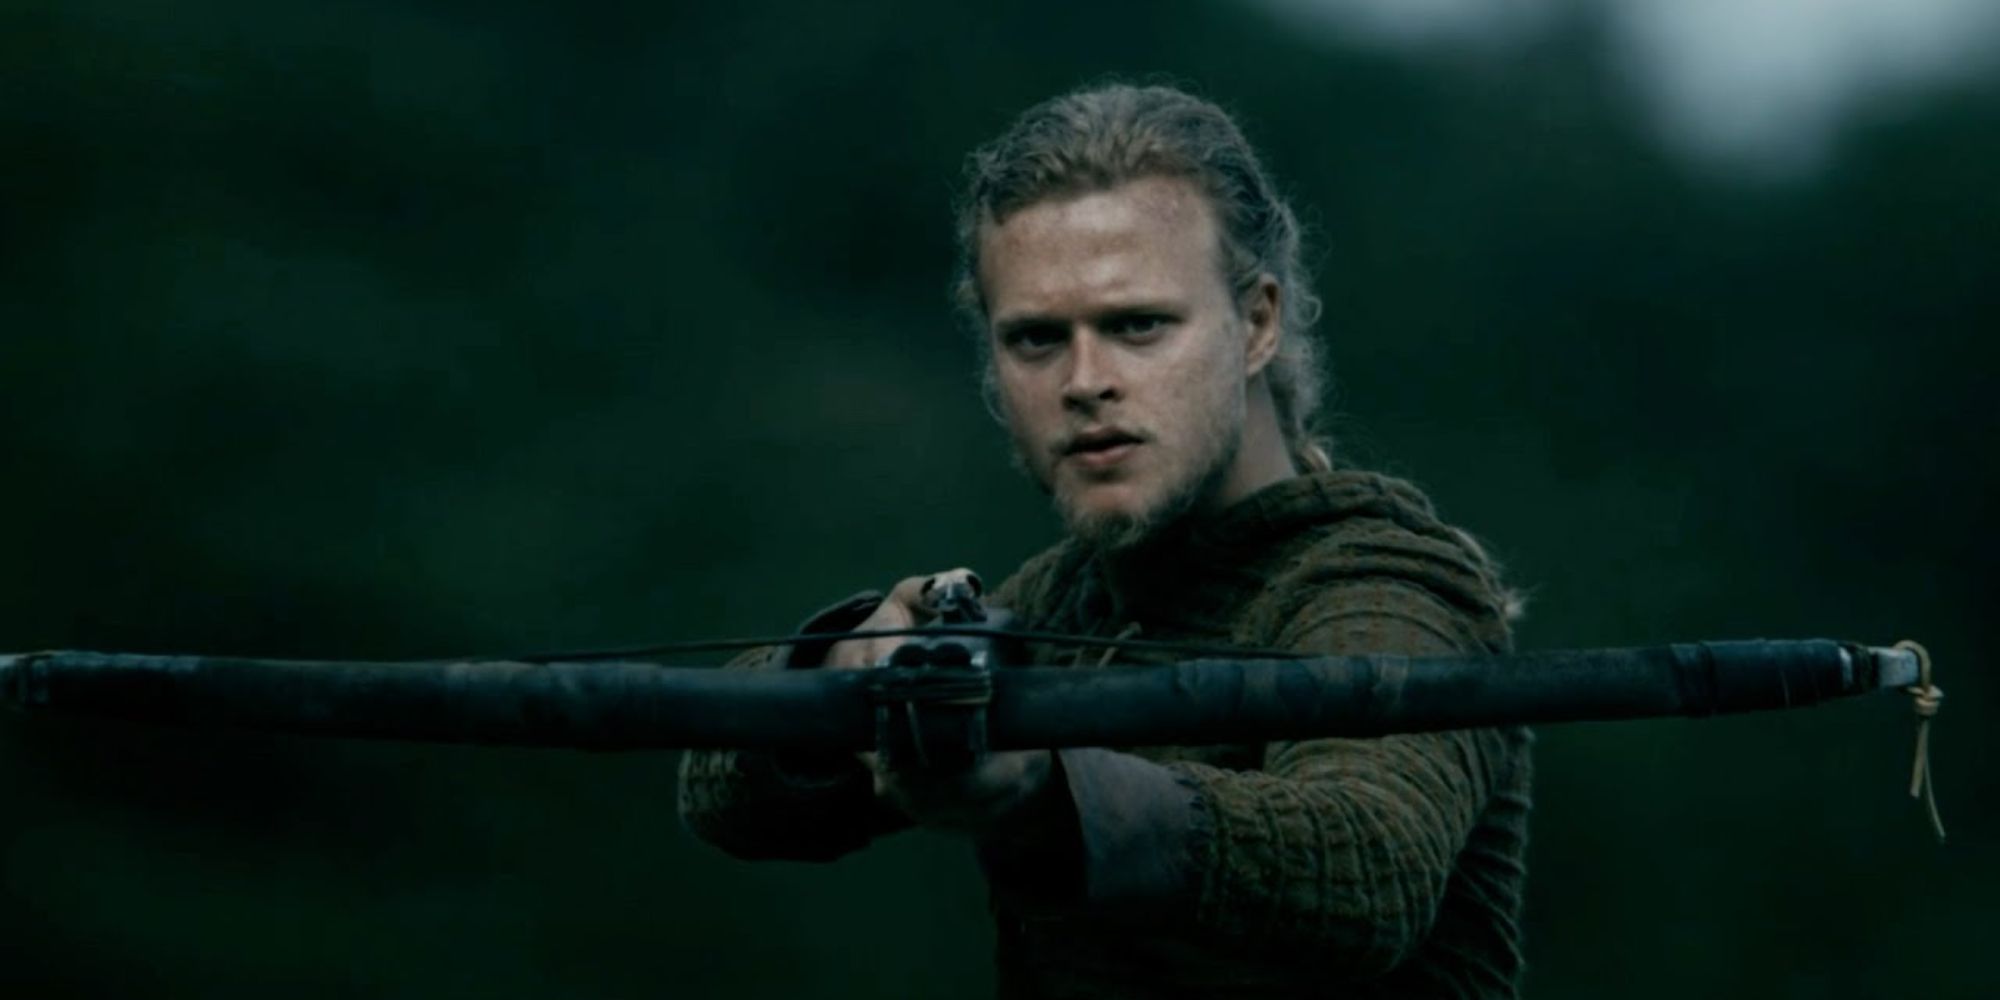 Vikings 5 Characters Who Were Gone Too Soon (& 5 Who Overstayed Their Welcome)